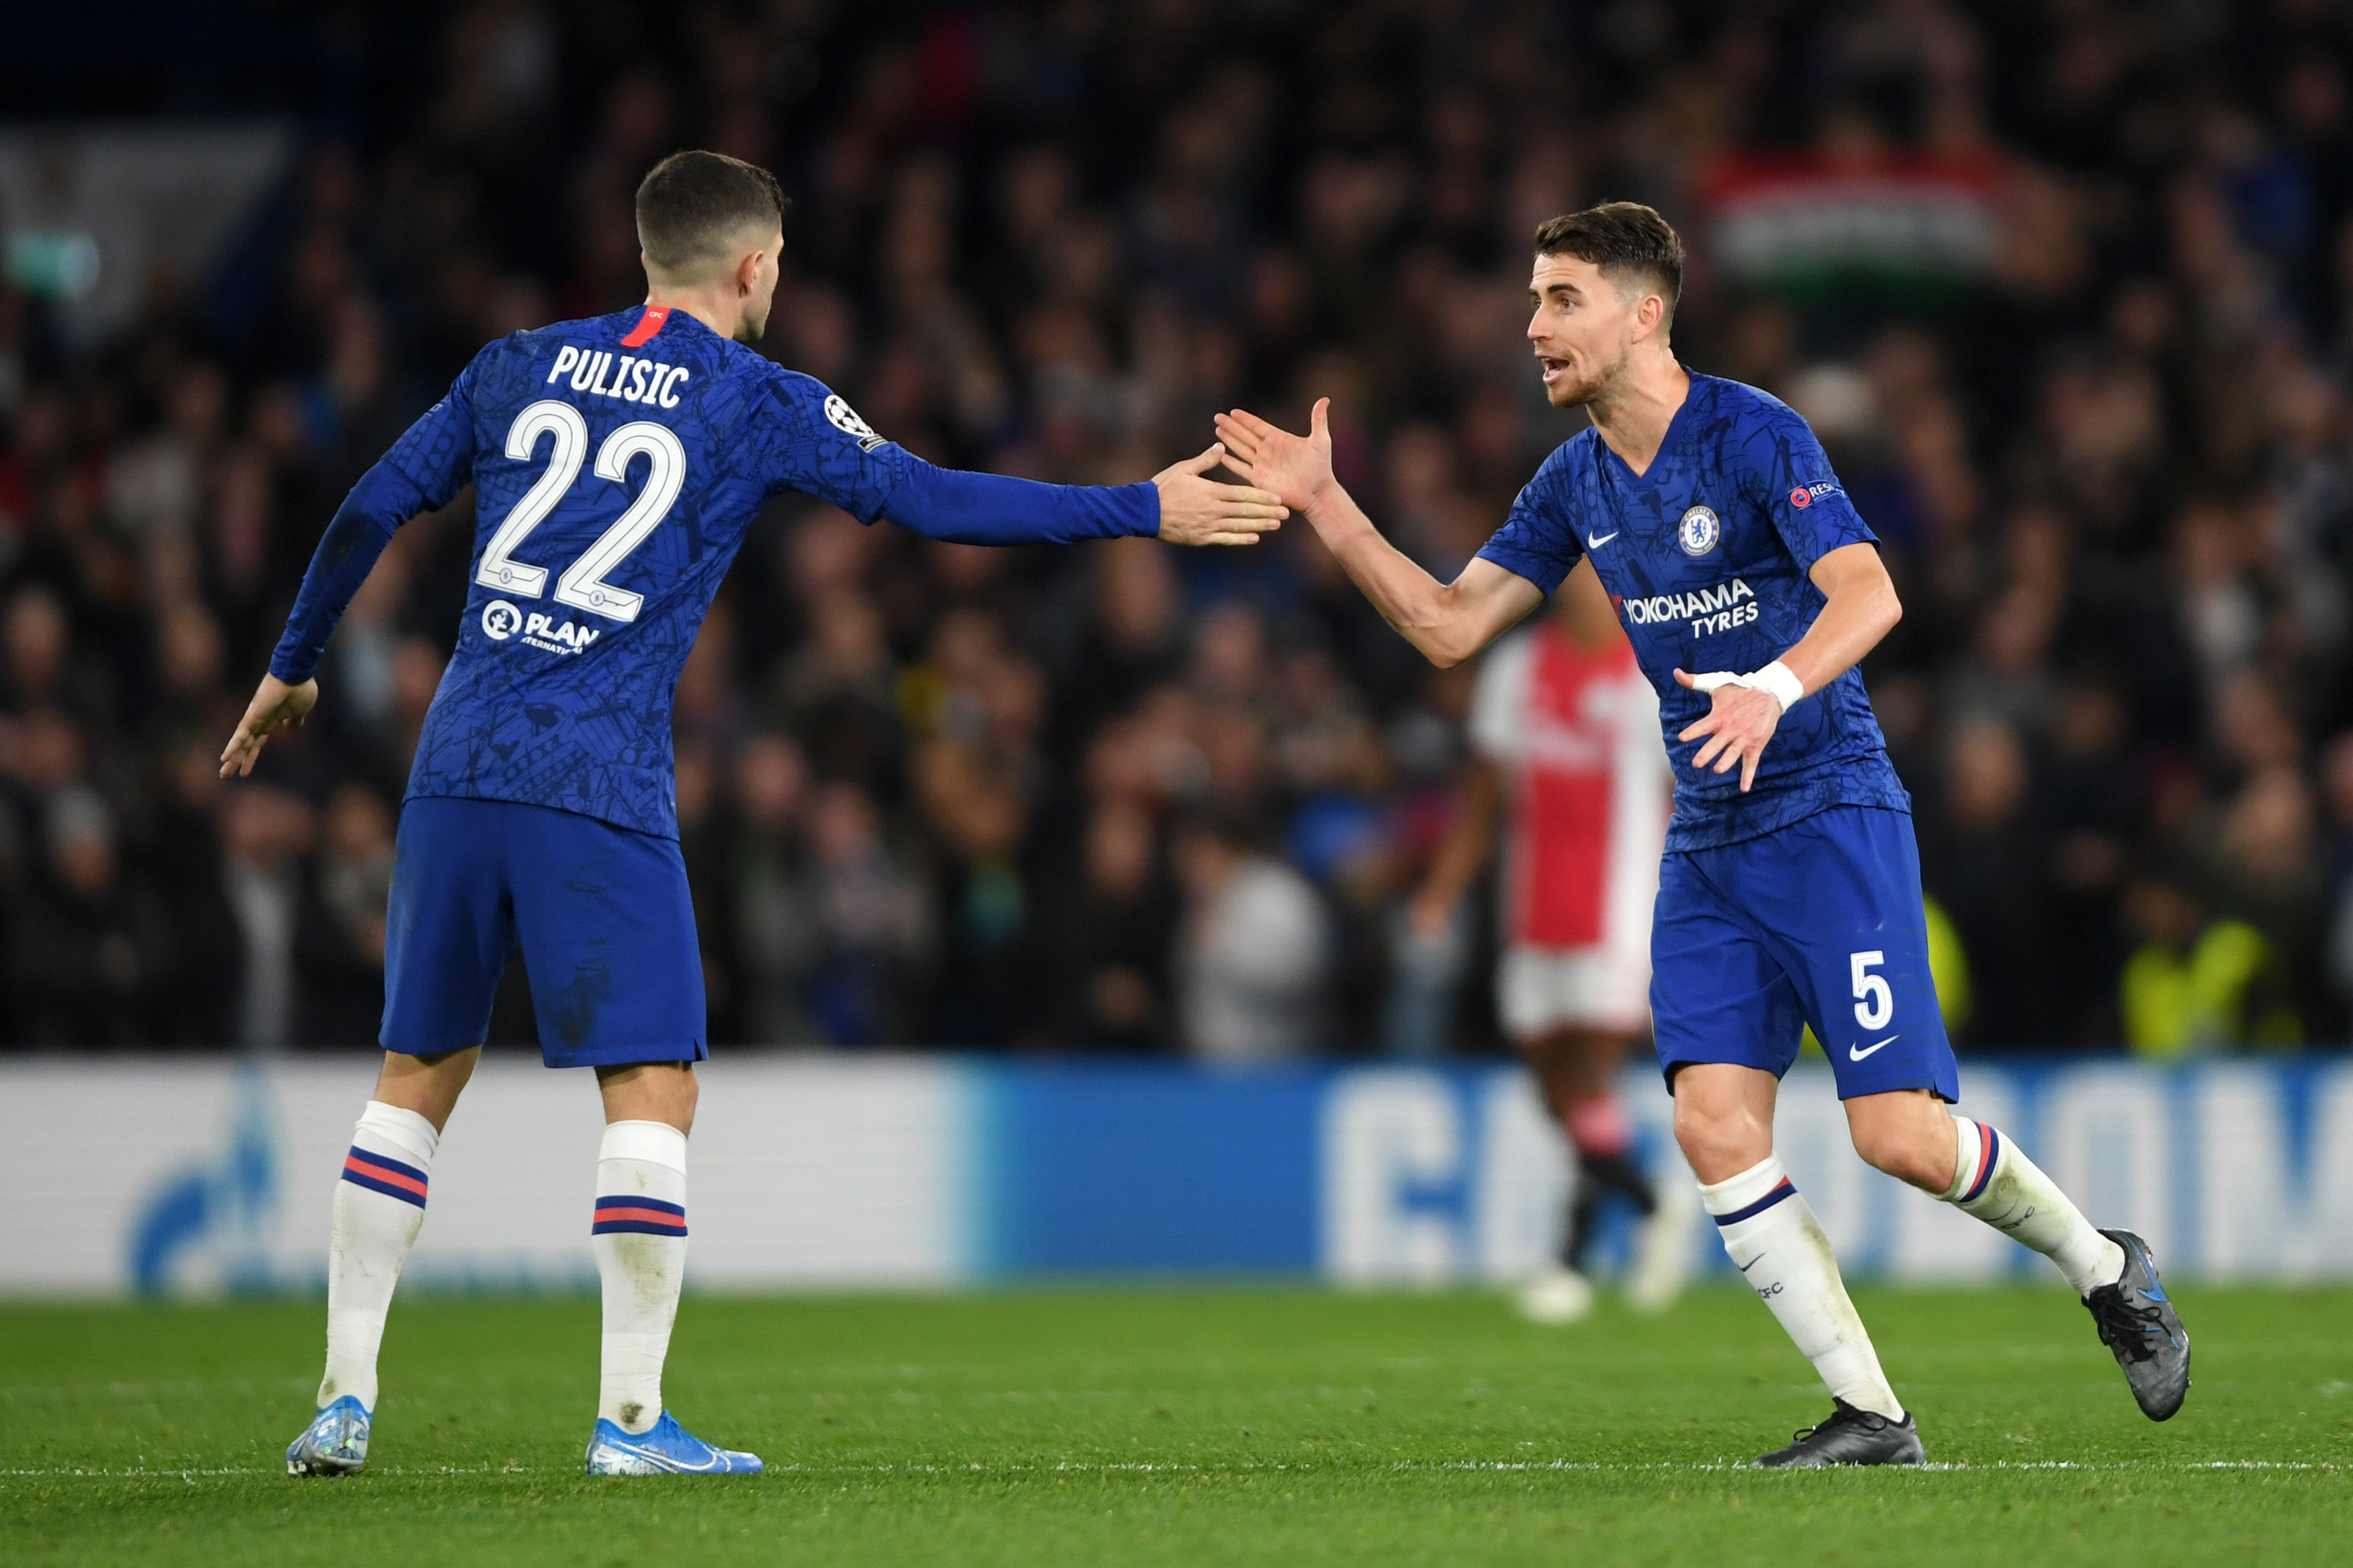 LONDON, ENGLAND - NOVEMBER 05: Christian Pulisic interacts with Jorginho during the UEFA Champions League group H match between Chelsea FC and AFC Ajax at Stamford Bridge on November 05, 2019 in London, United Kingdom. (Photo by Mike Hewitt/Getty Images)